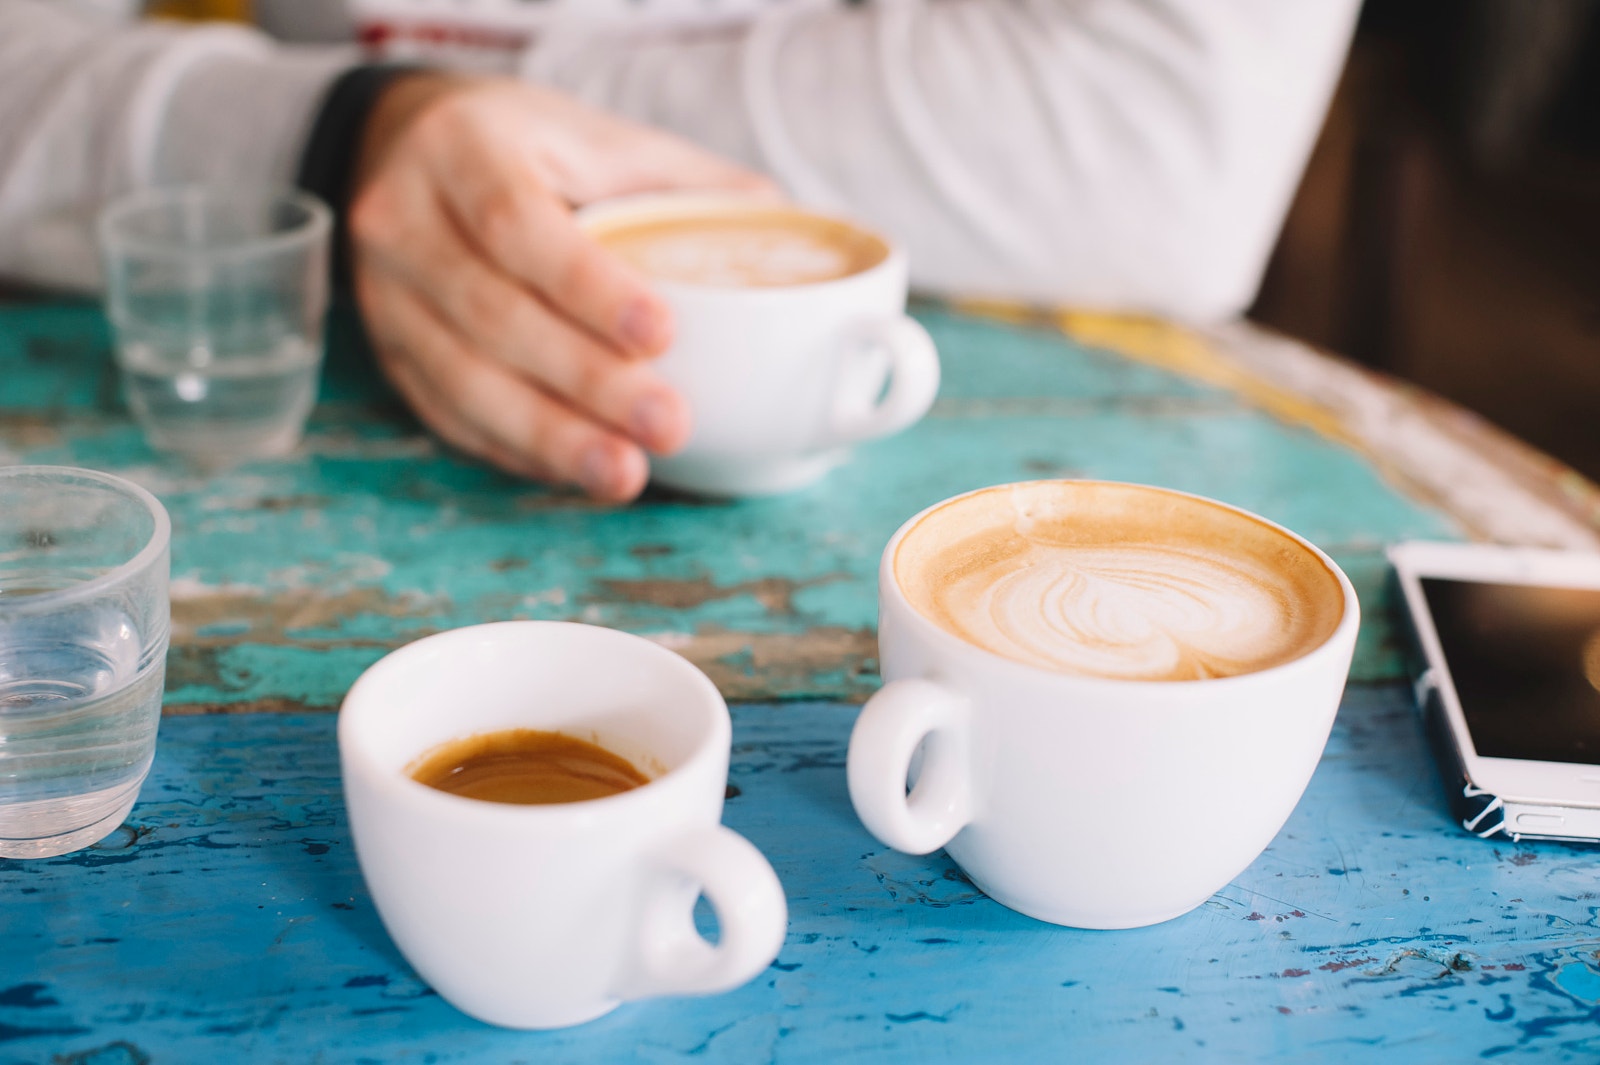 Coffee Talk: Understanding the Visual Preferences of Your Customers